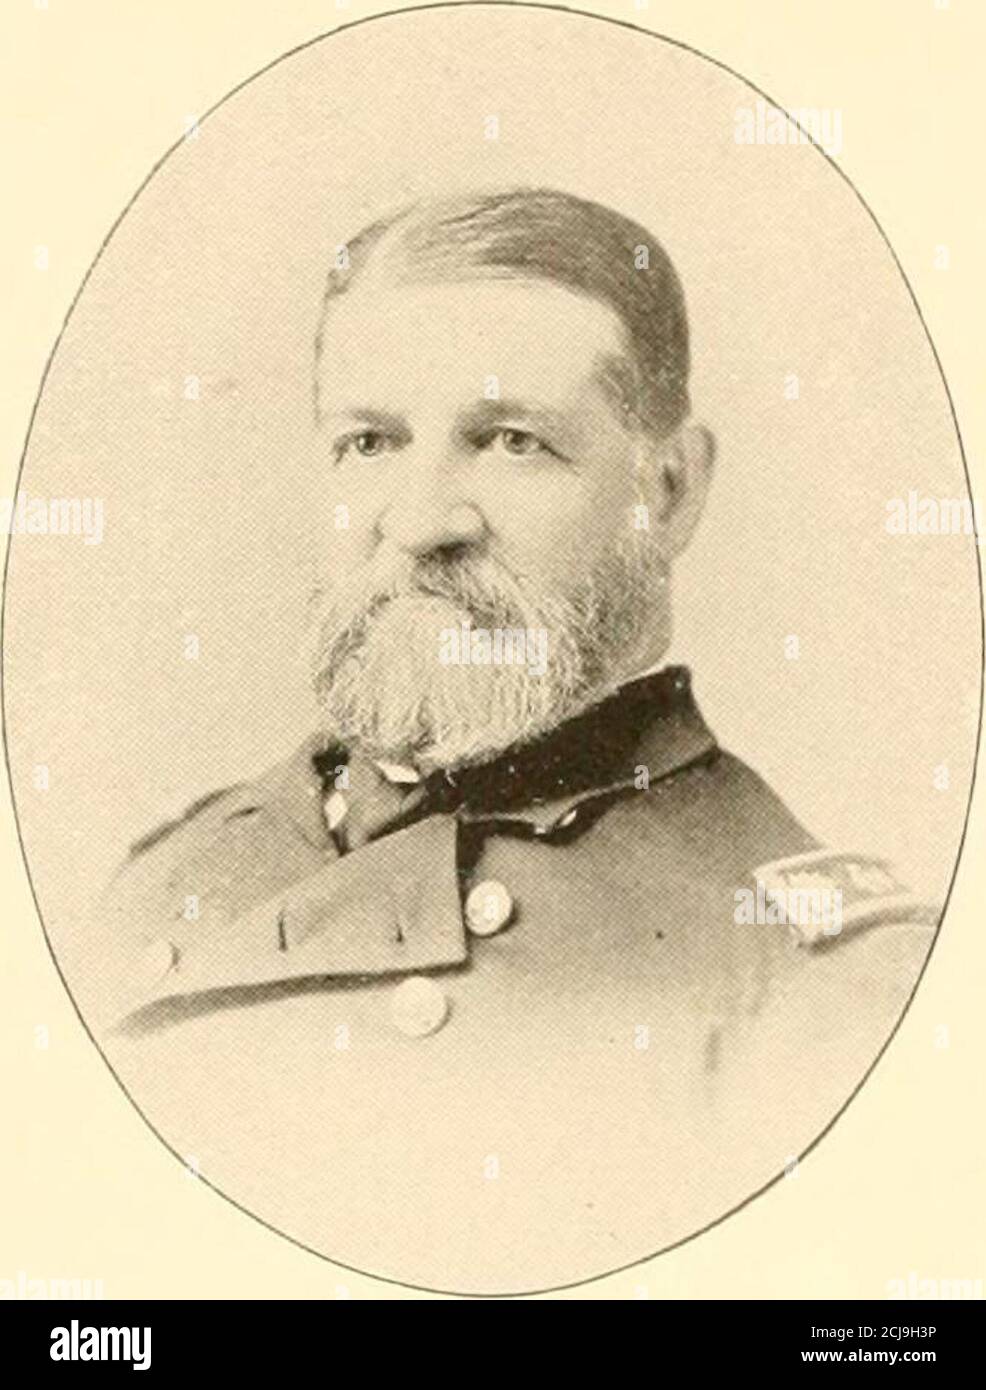 . Officers of the army and navy (regular) who served in the Civil War . , and in charge of the Bureau from October25, 1873, to January 19, 1874, and from January 28 toFebruary 20, 1875 ; he served as commissioner to auditKansas war accounts, under act of Congress, from March8 to April 5, 1871 ; as chief quartermaster of the Depart-ment of the Missouri, Fort Leavenworth, Kansas, fromOctober, 1879, to November, 1883; as chief quartermas-ter, Division of the Pacific and Department of California,from November, 1883, to about May 30, 1886; as chiefquartermaster, Division of the Missouri, Chicago, I Stock Photo